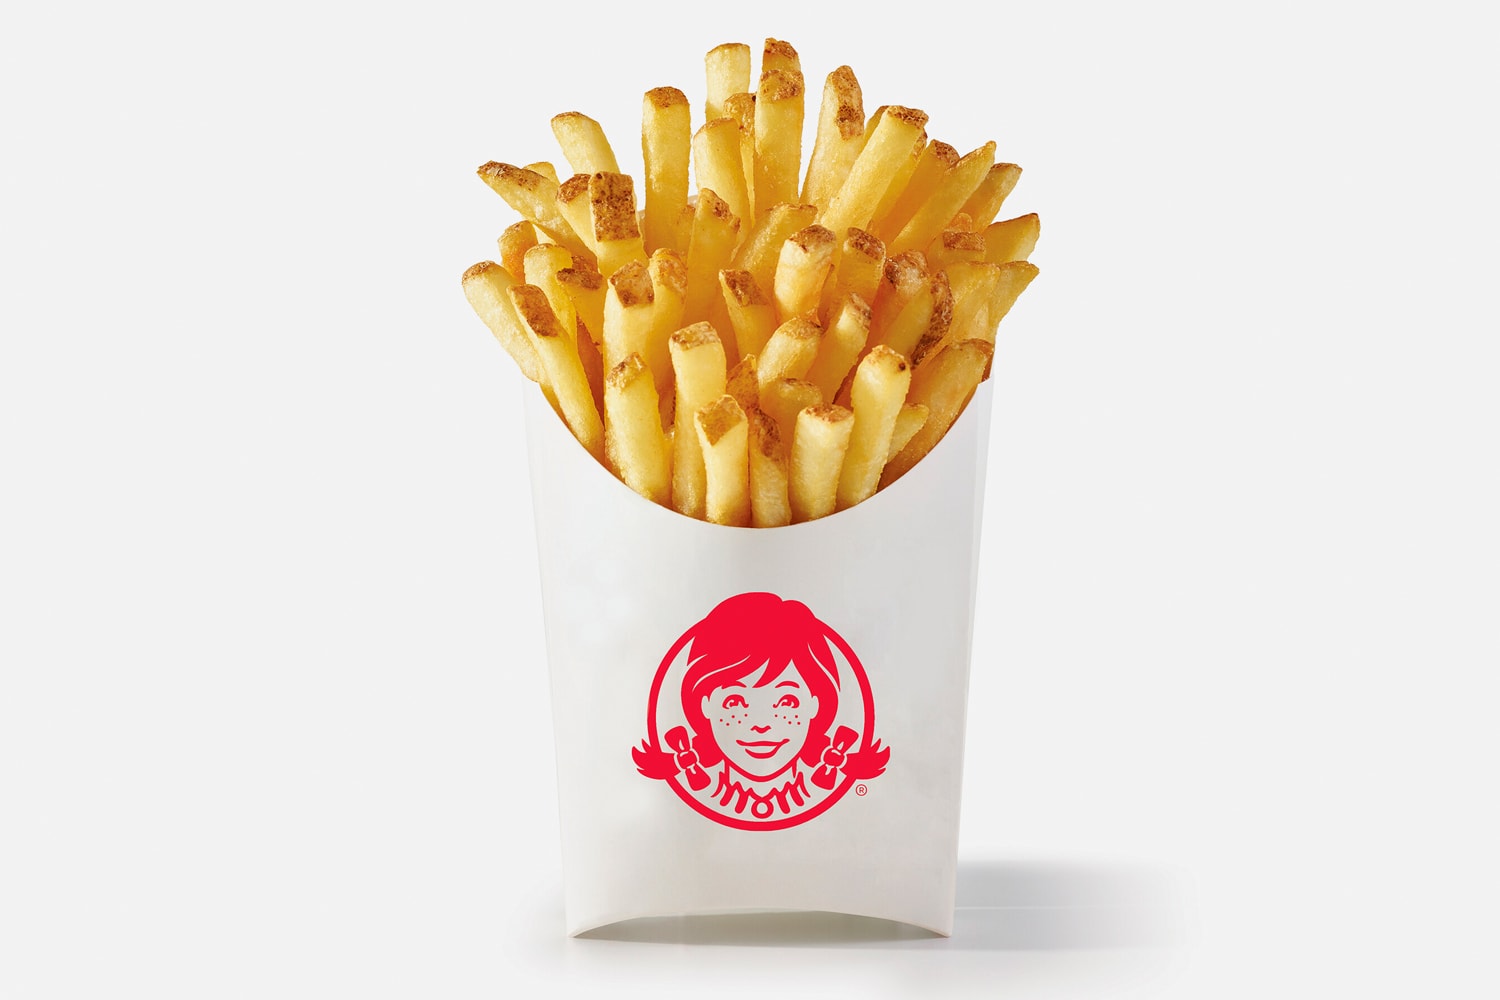 Wendy’s New Hot & Crispy Fries Launch Info Taste Review